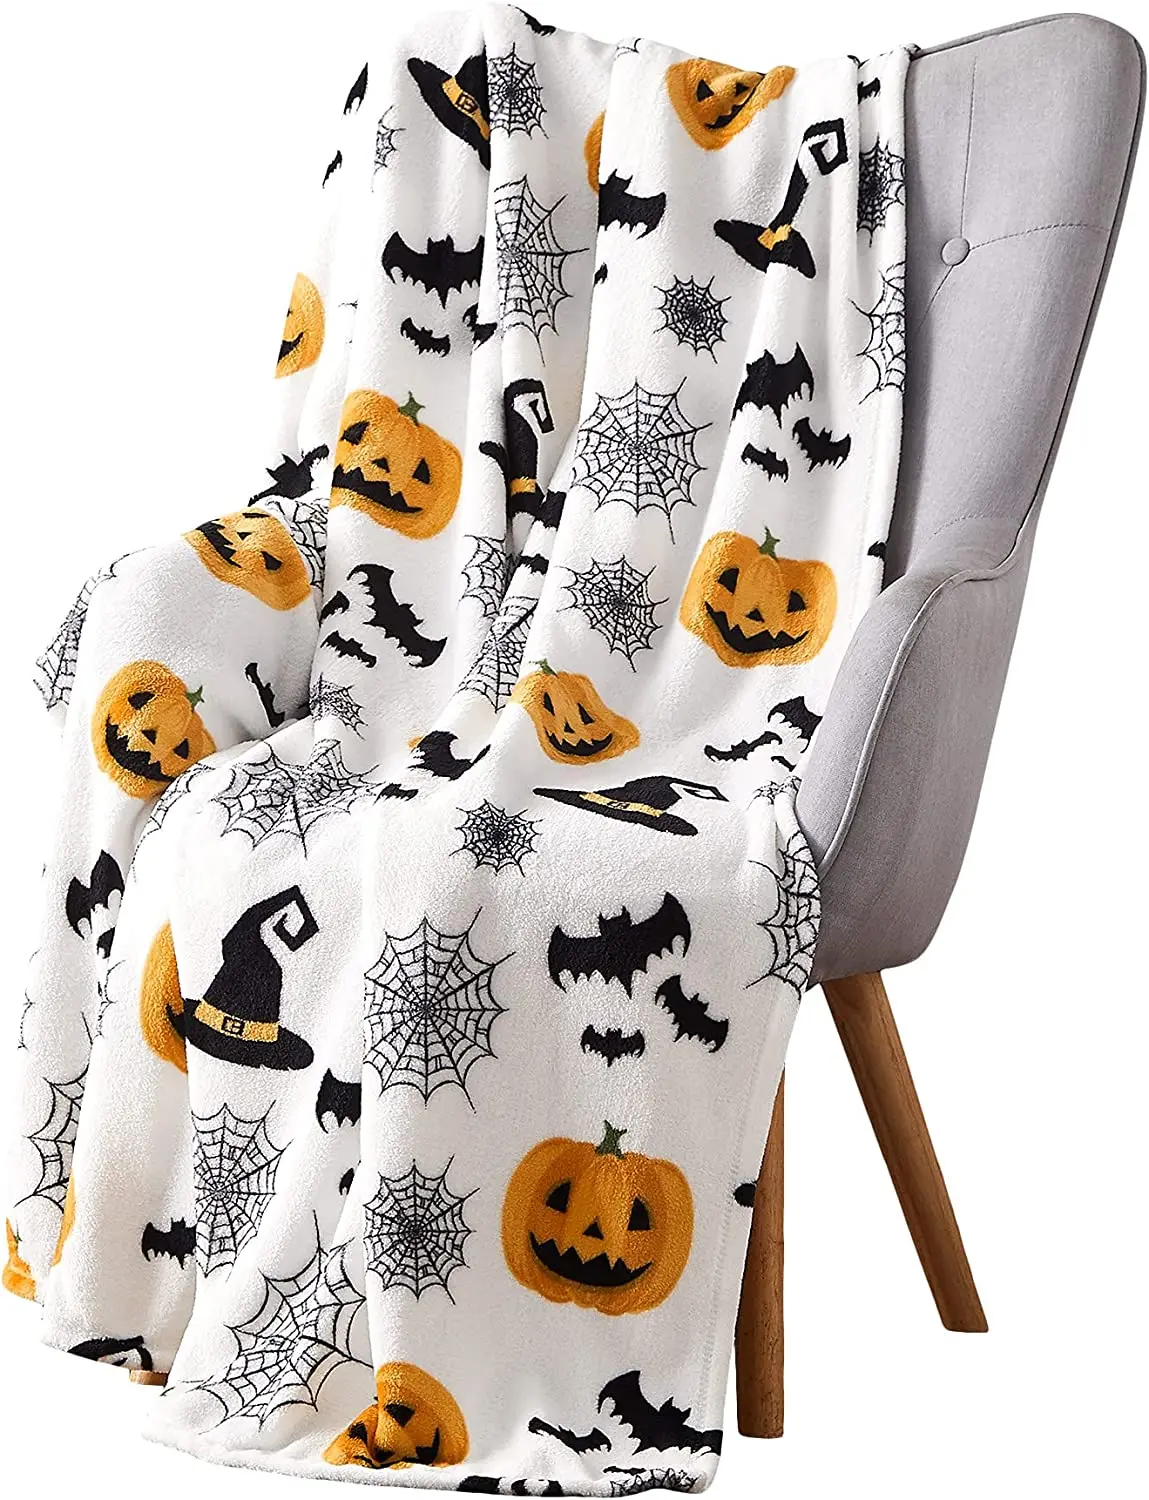 Halloween Throw Blanket Spider Webs Witch's Hat Black Bats and Decorated Pumpkins Print on Soft Velvet Fleece for Sofa Bed Couch